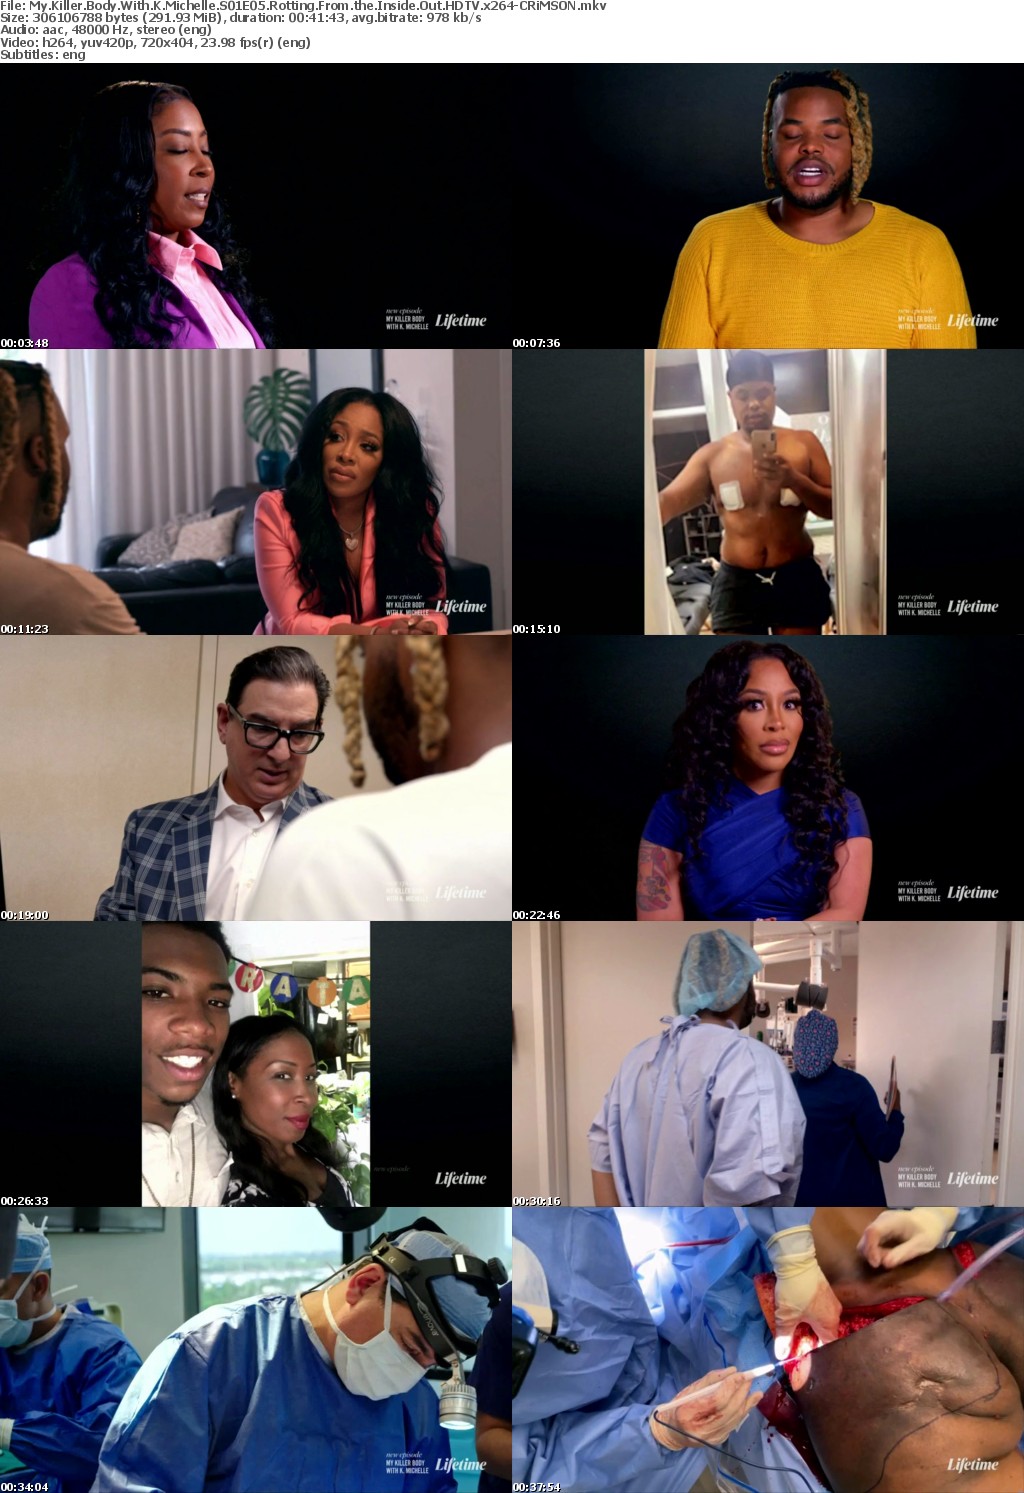 My Killer Body With K Michelle S01E05 Rotting From the Inside Out HDTV x264-CRiMSON